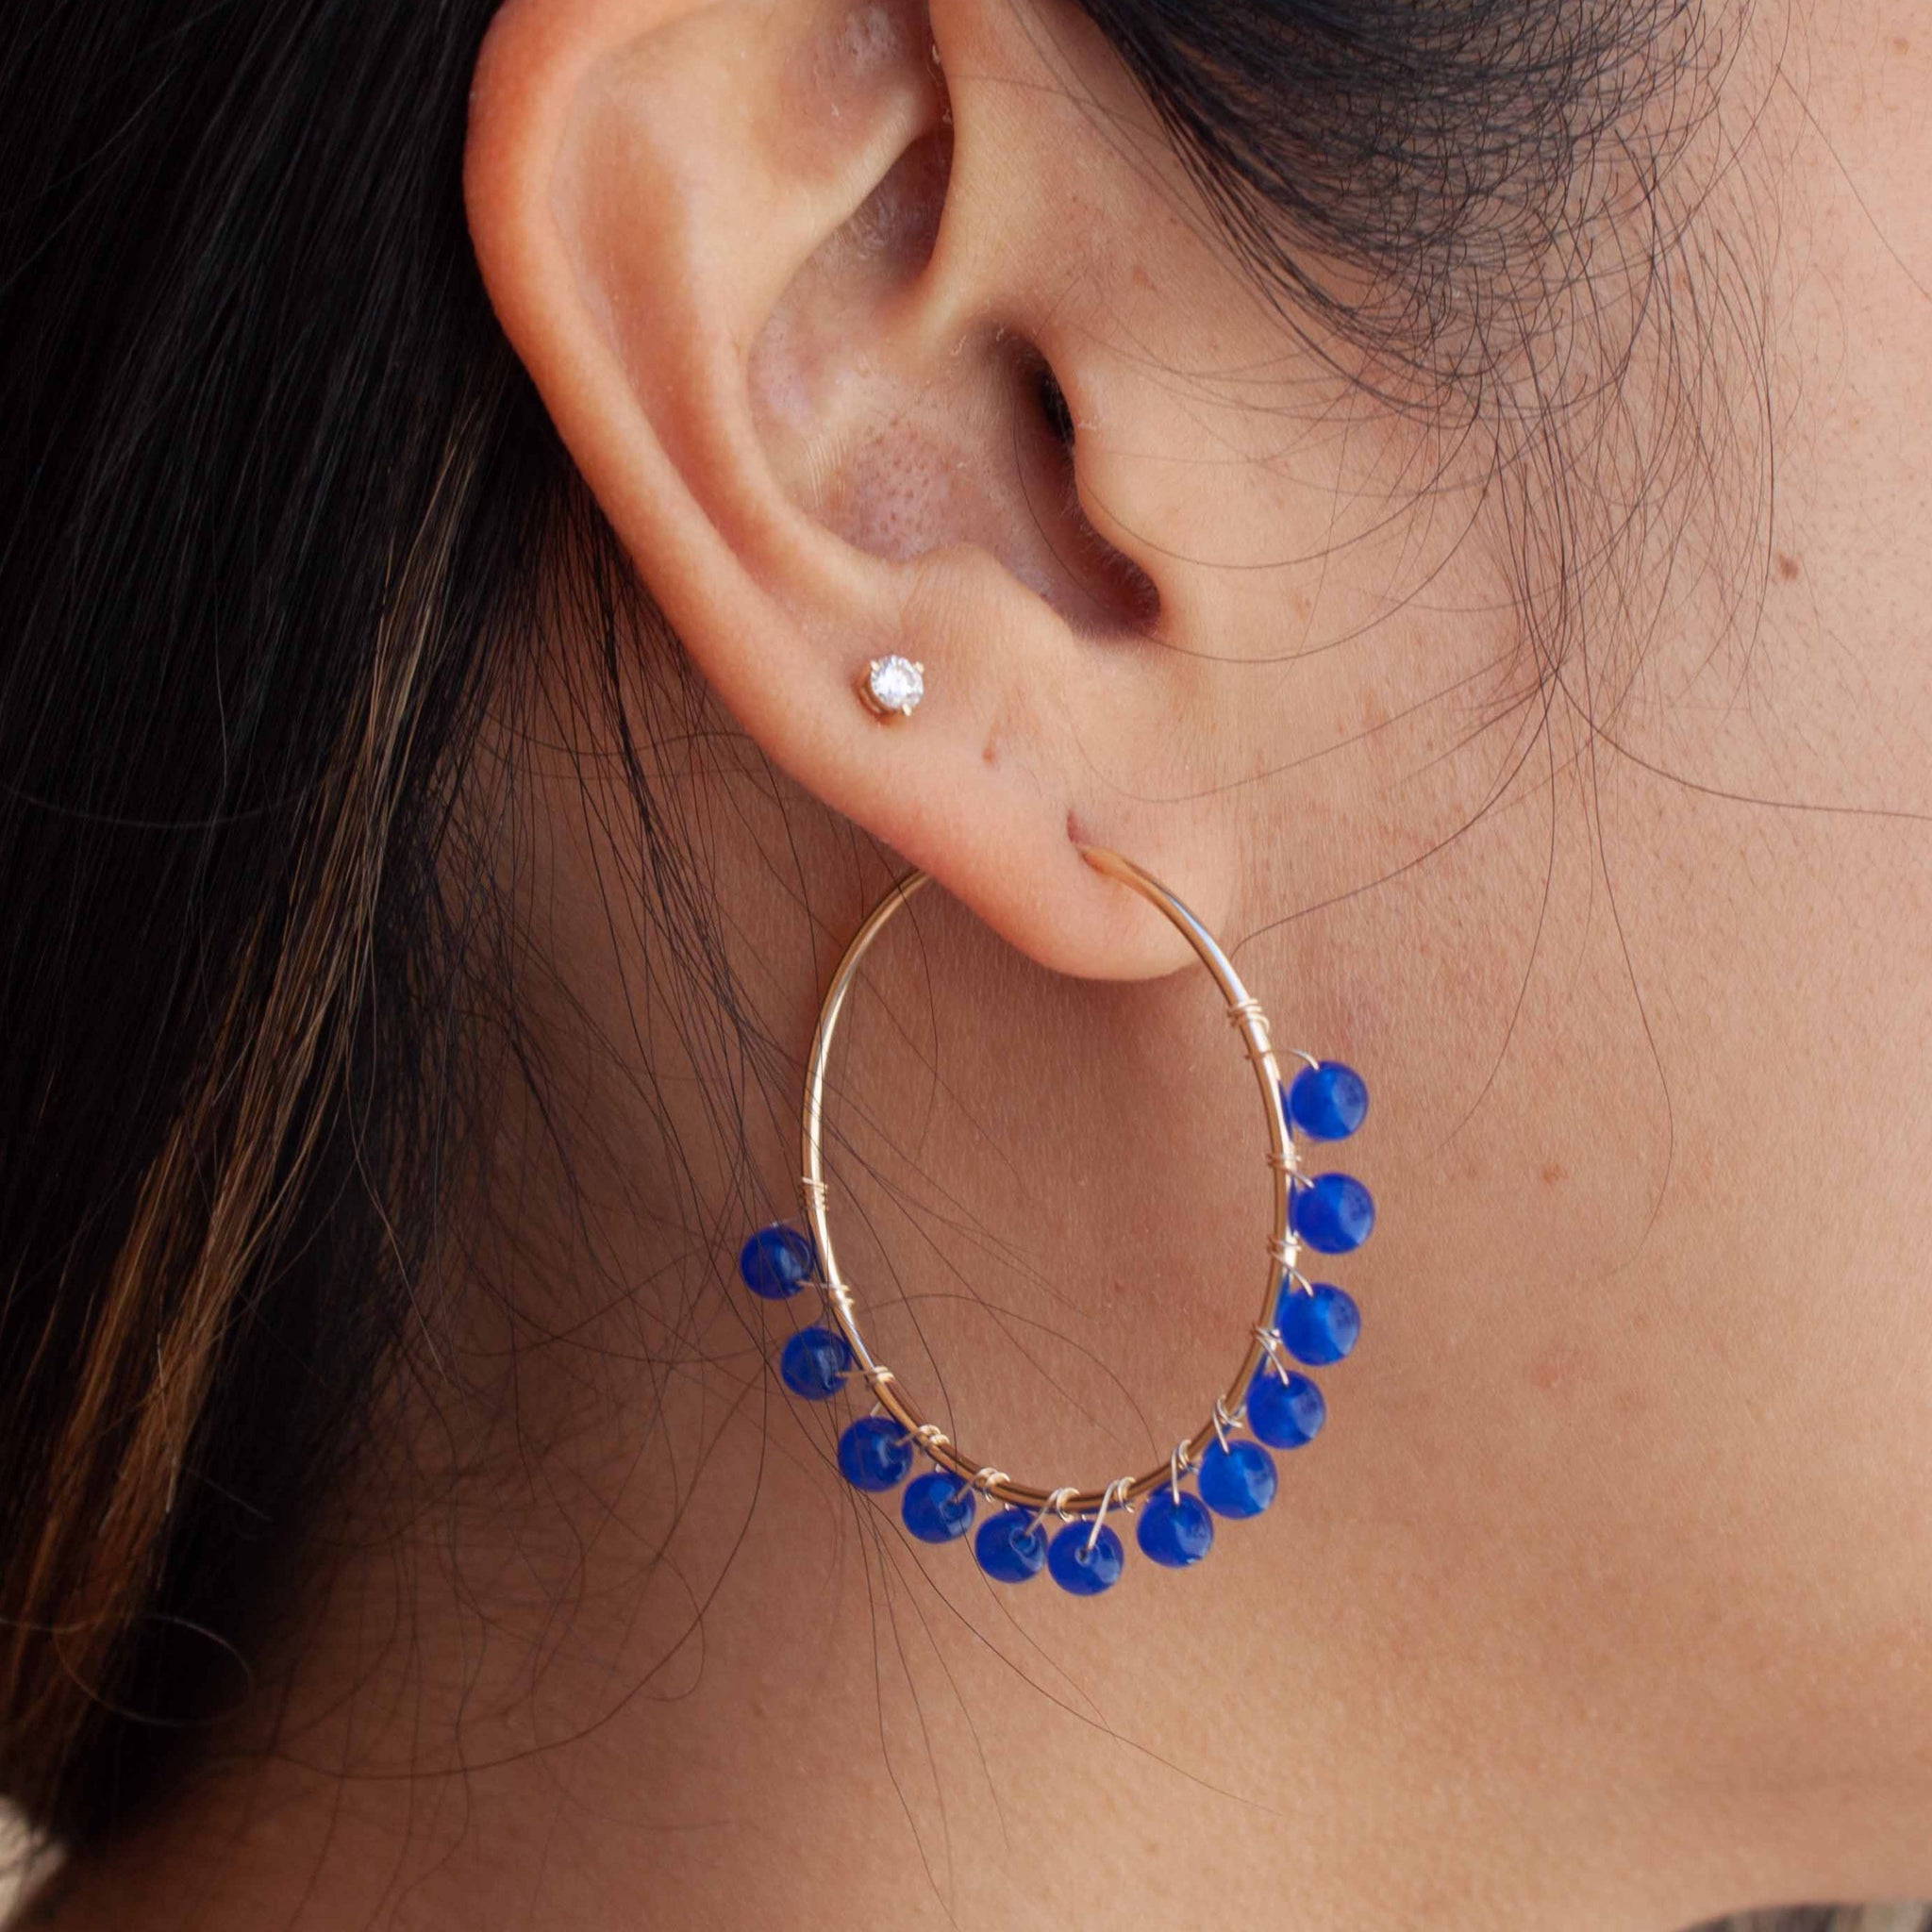 Bodacious ear candy to crank up your waterside cocktails this summer!  40mm gold filled hoop earrings and navy beads wrapped with gold wire. Handmade in Toronto by kp jewelry co.